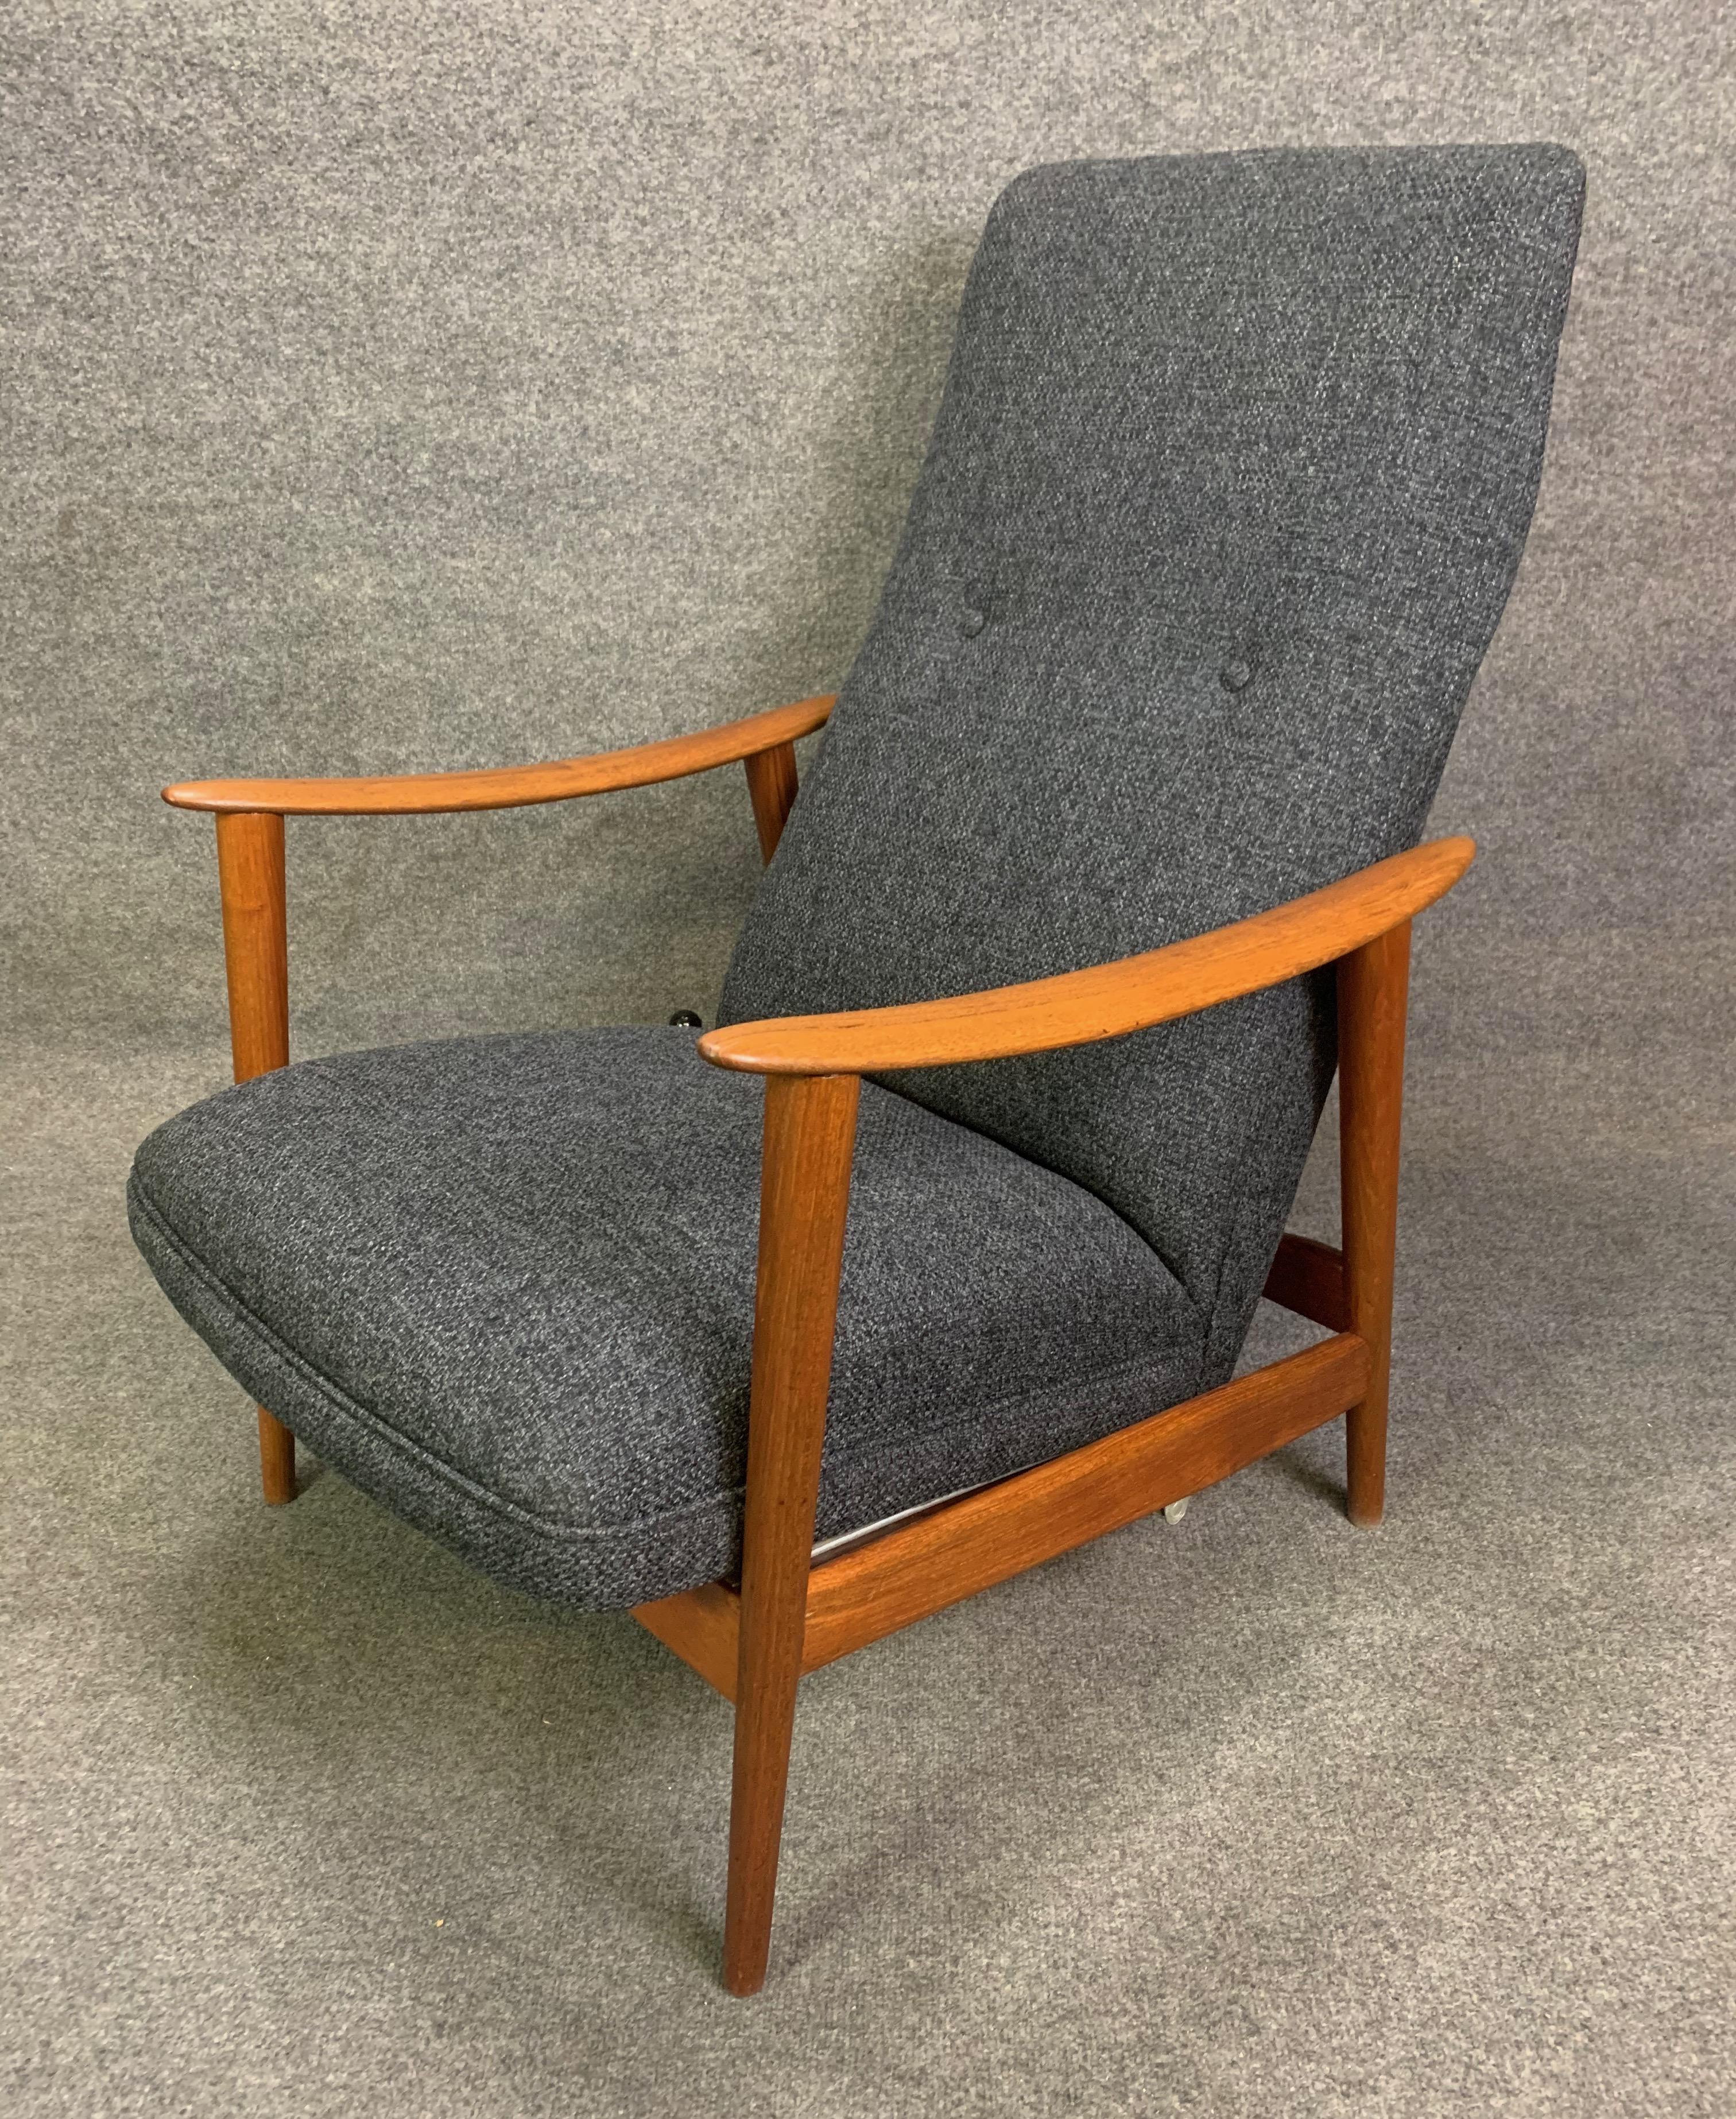 Vintage Scandinavian Midcentury Lounge Chair & Ottoman by Arnt Lande & Westnofa In Good Condition For Sale In San Marcos, CA